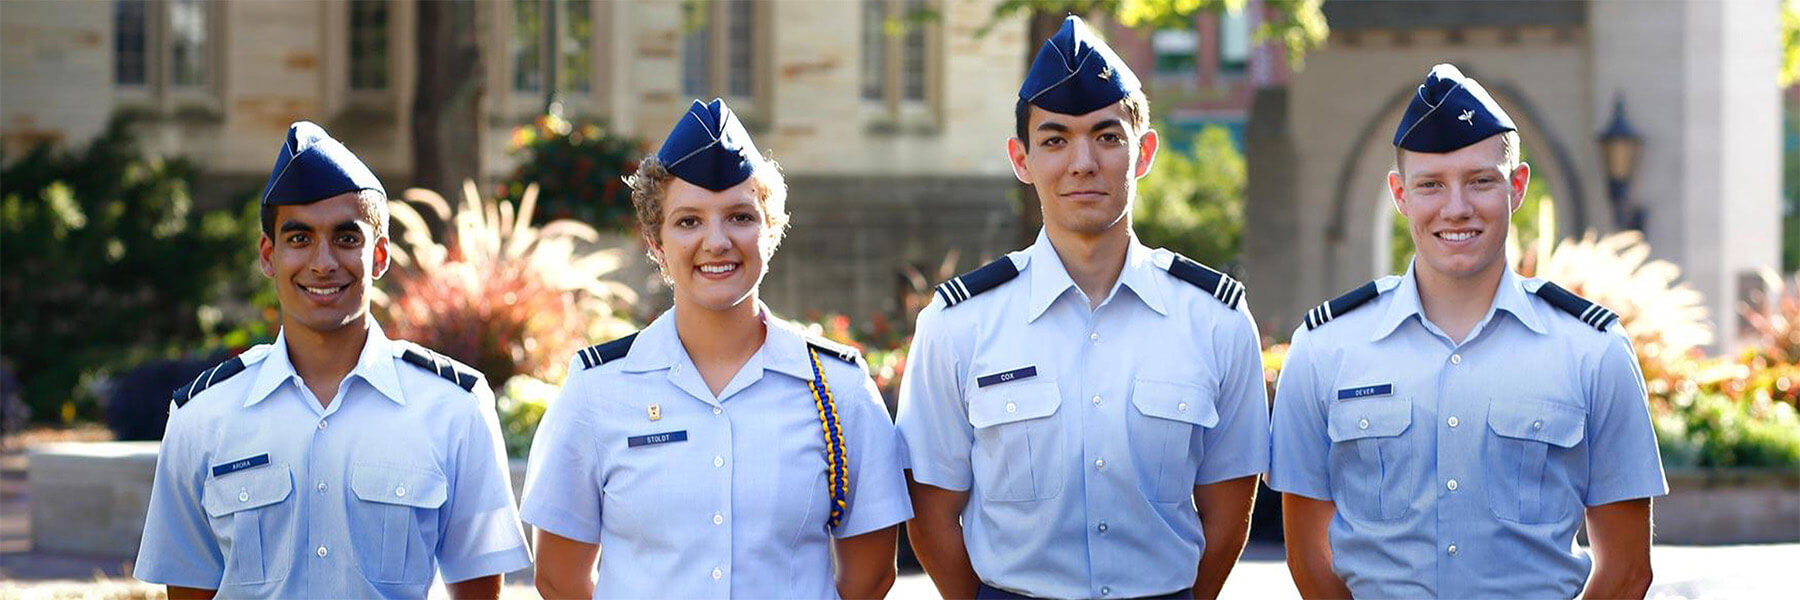 reserve cadets standing on campus